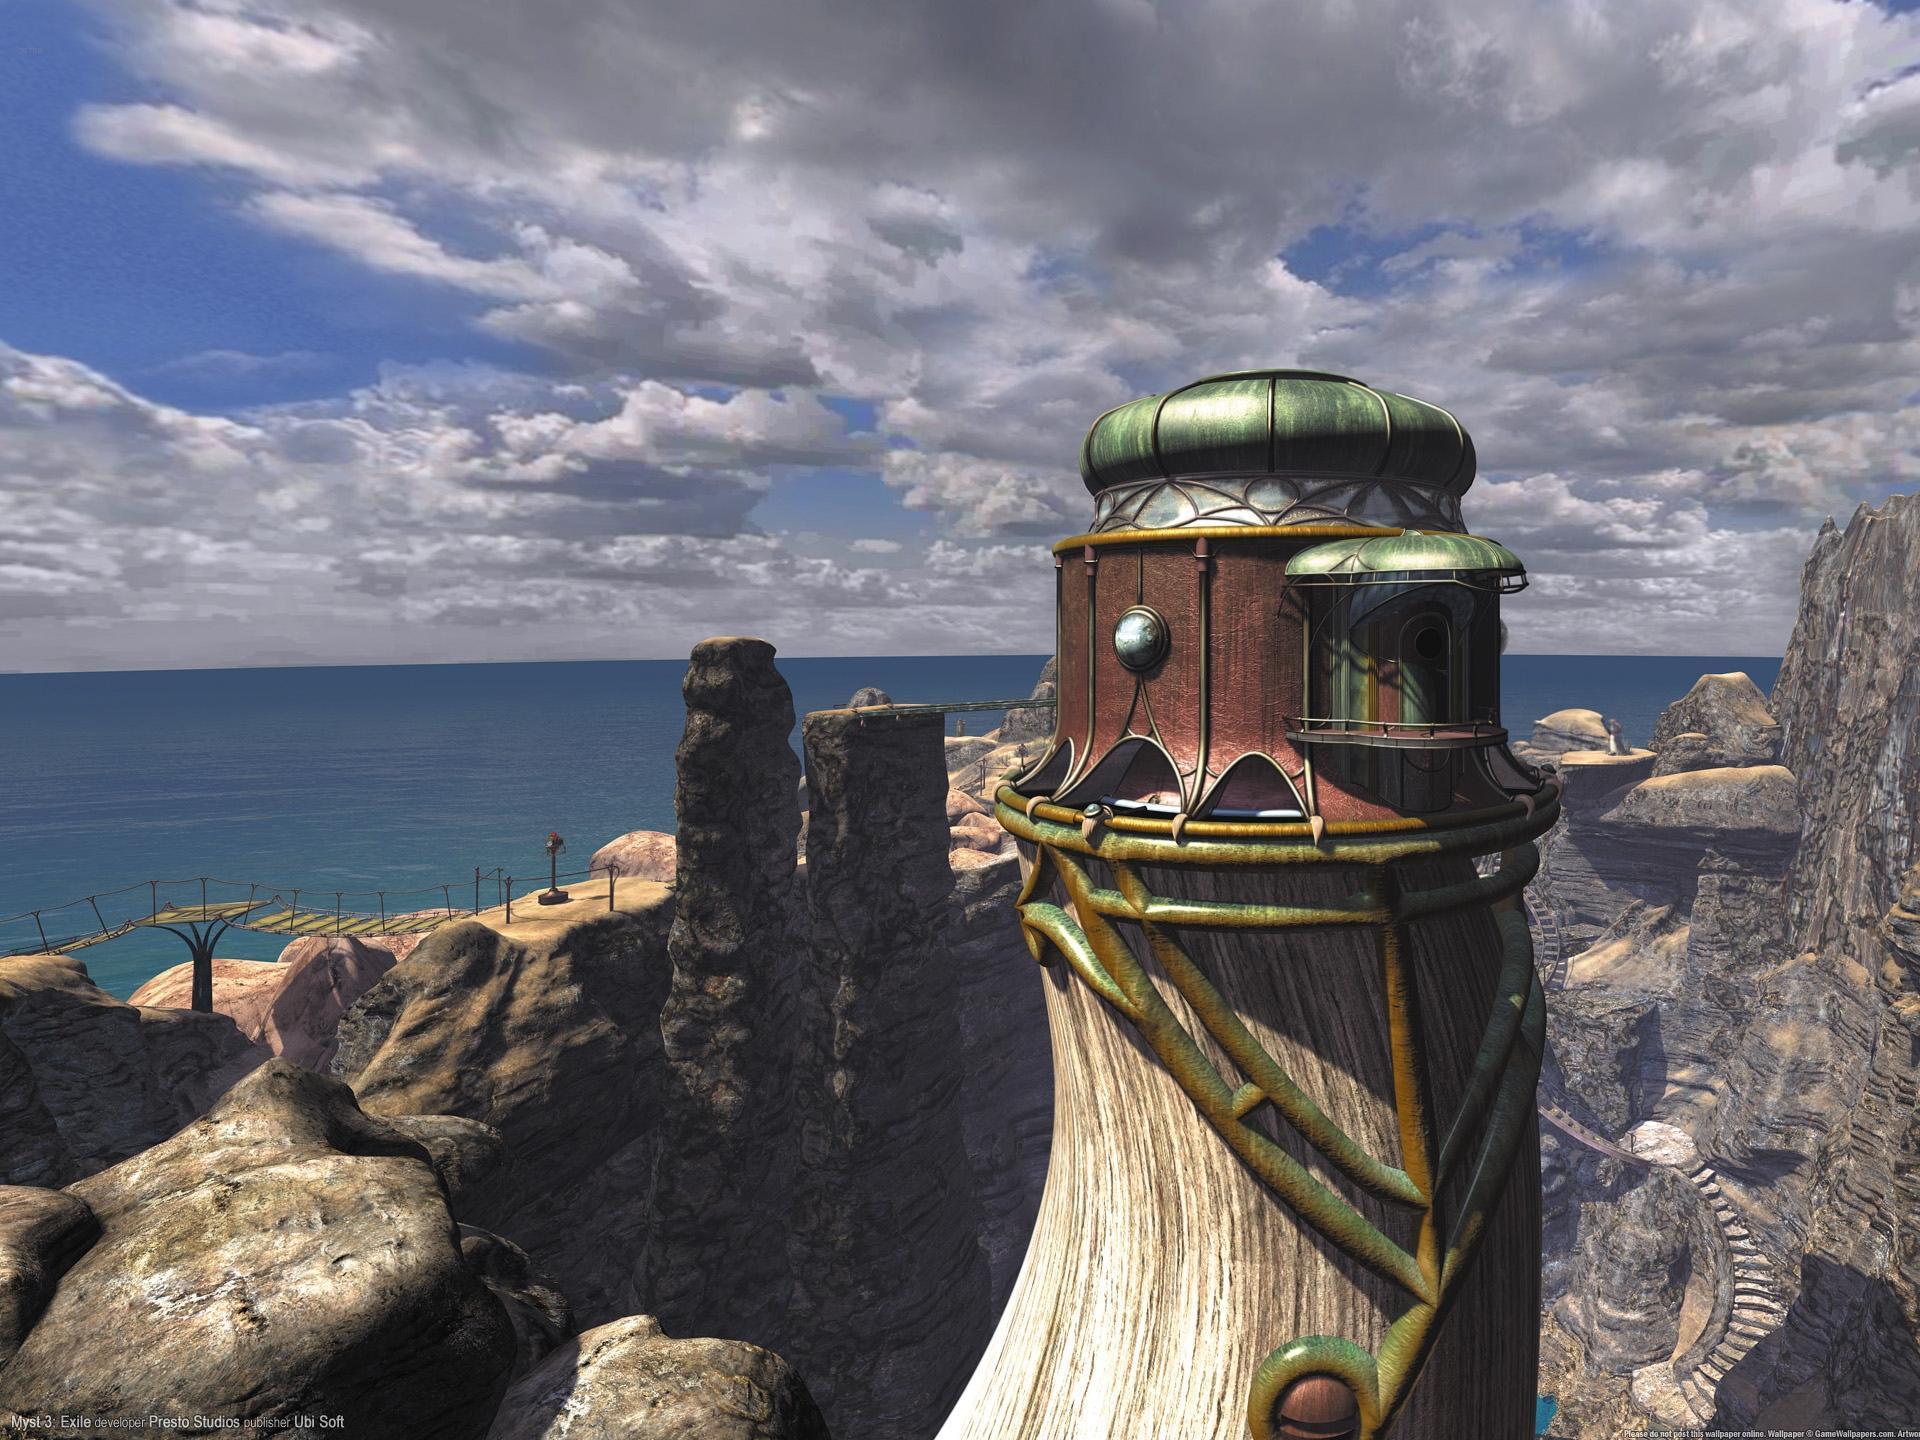 download quern myst for free